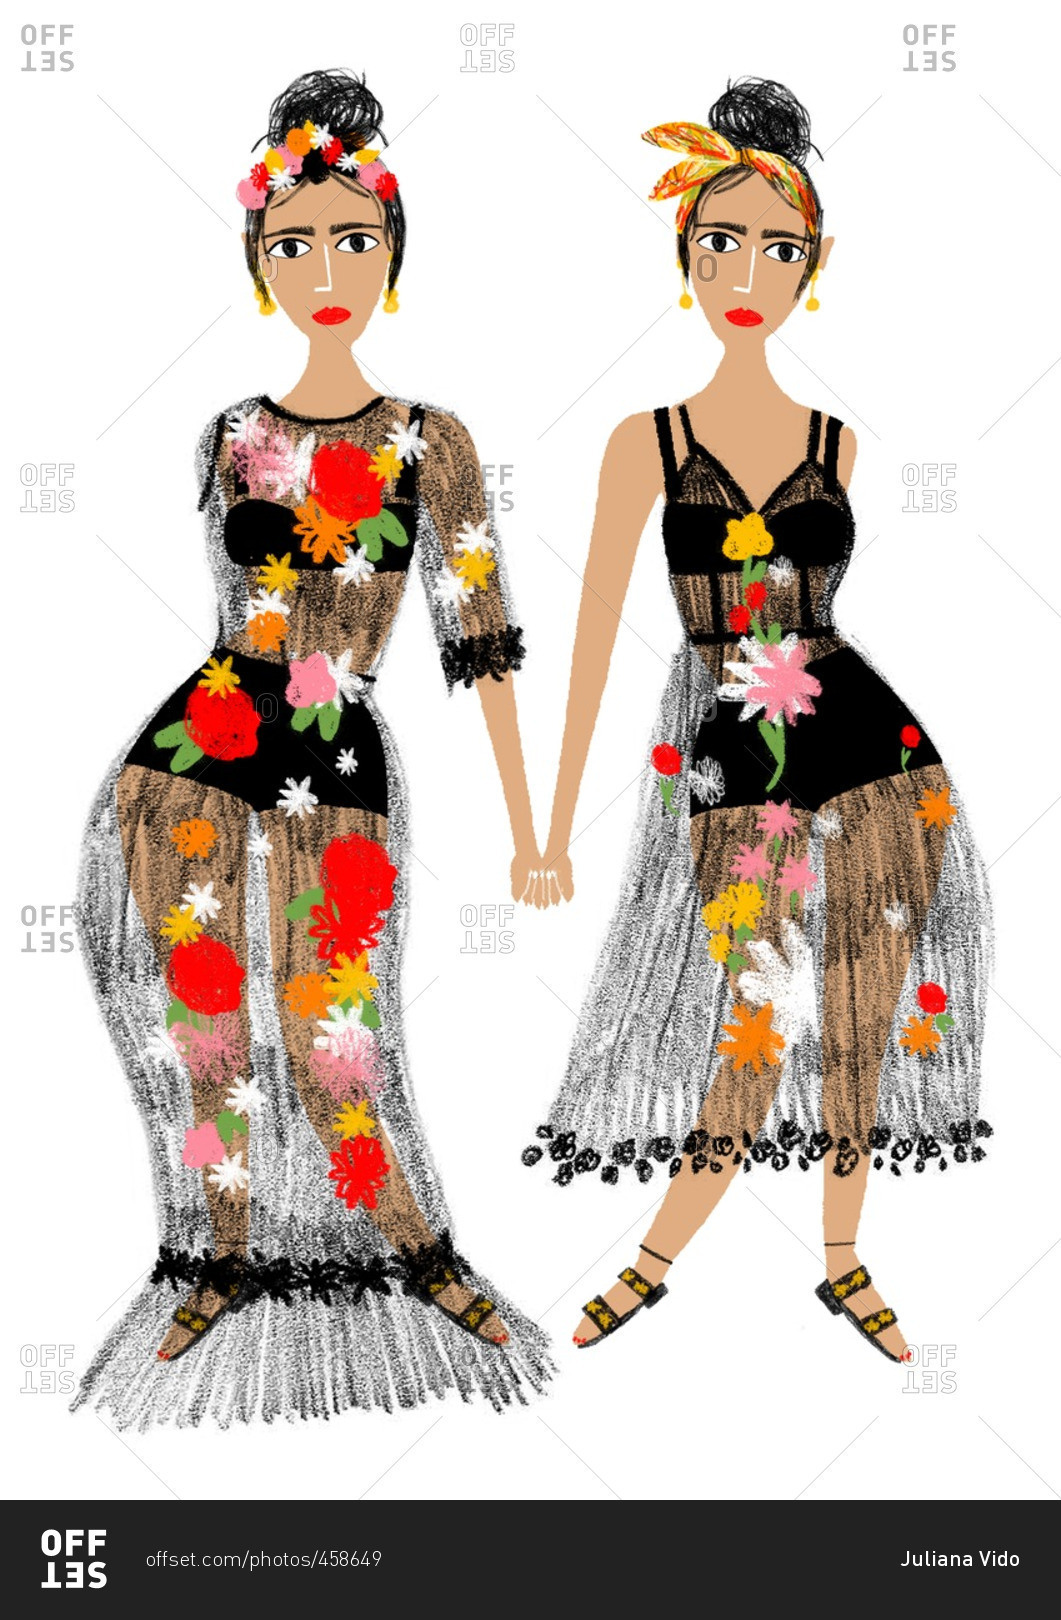 Two women wearing sheer dresses with bright floral embellishments